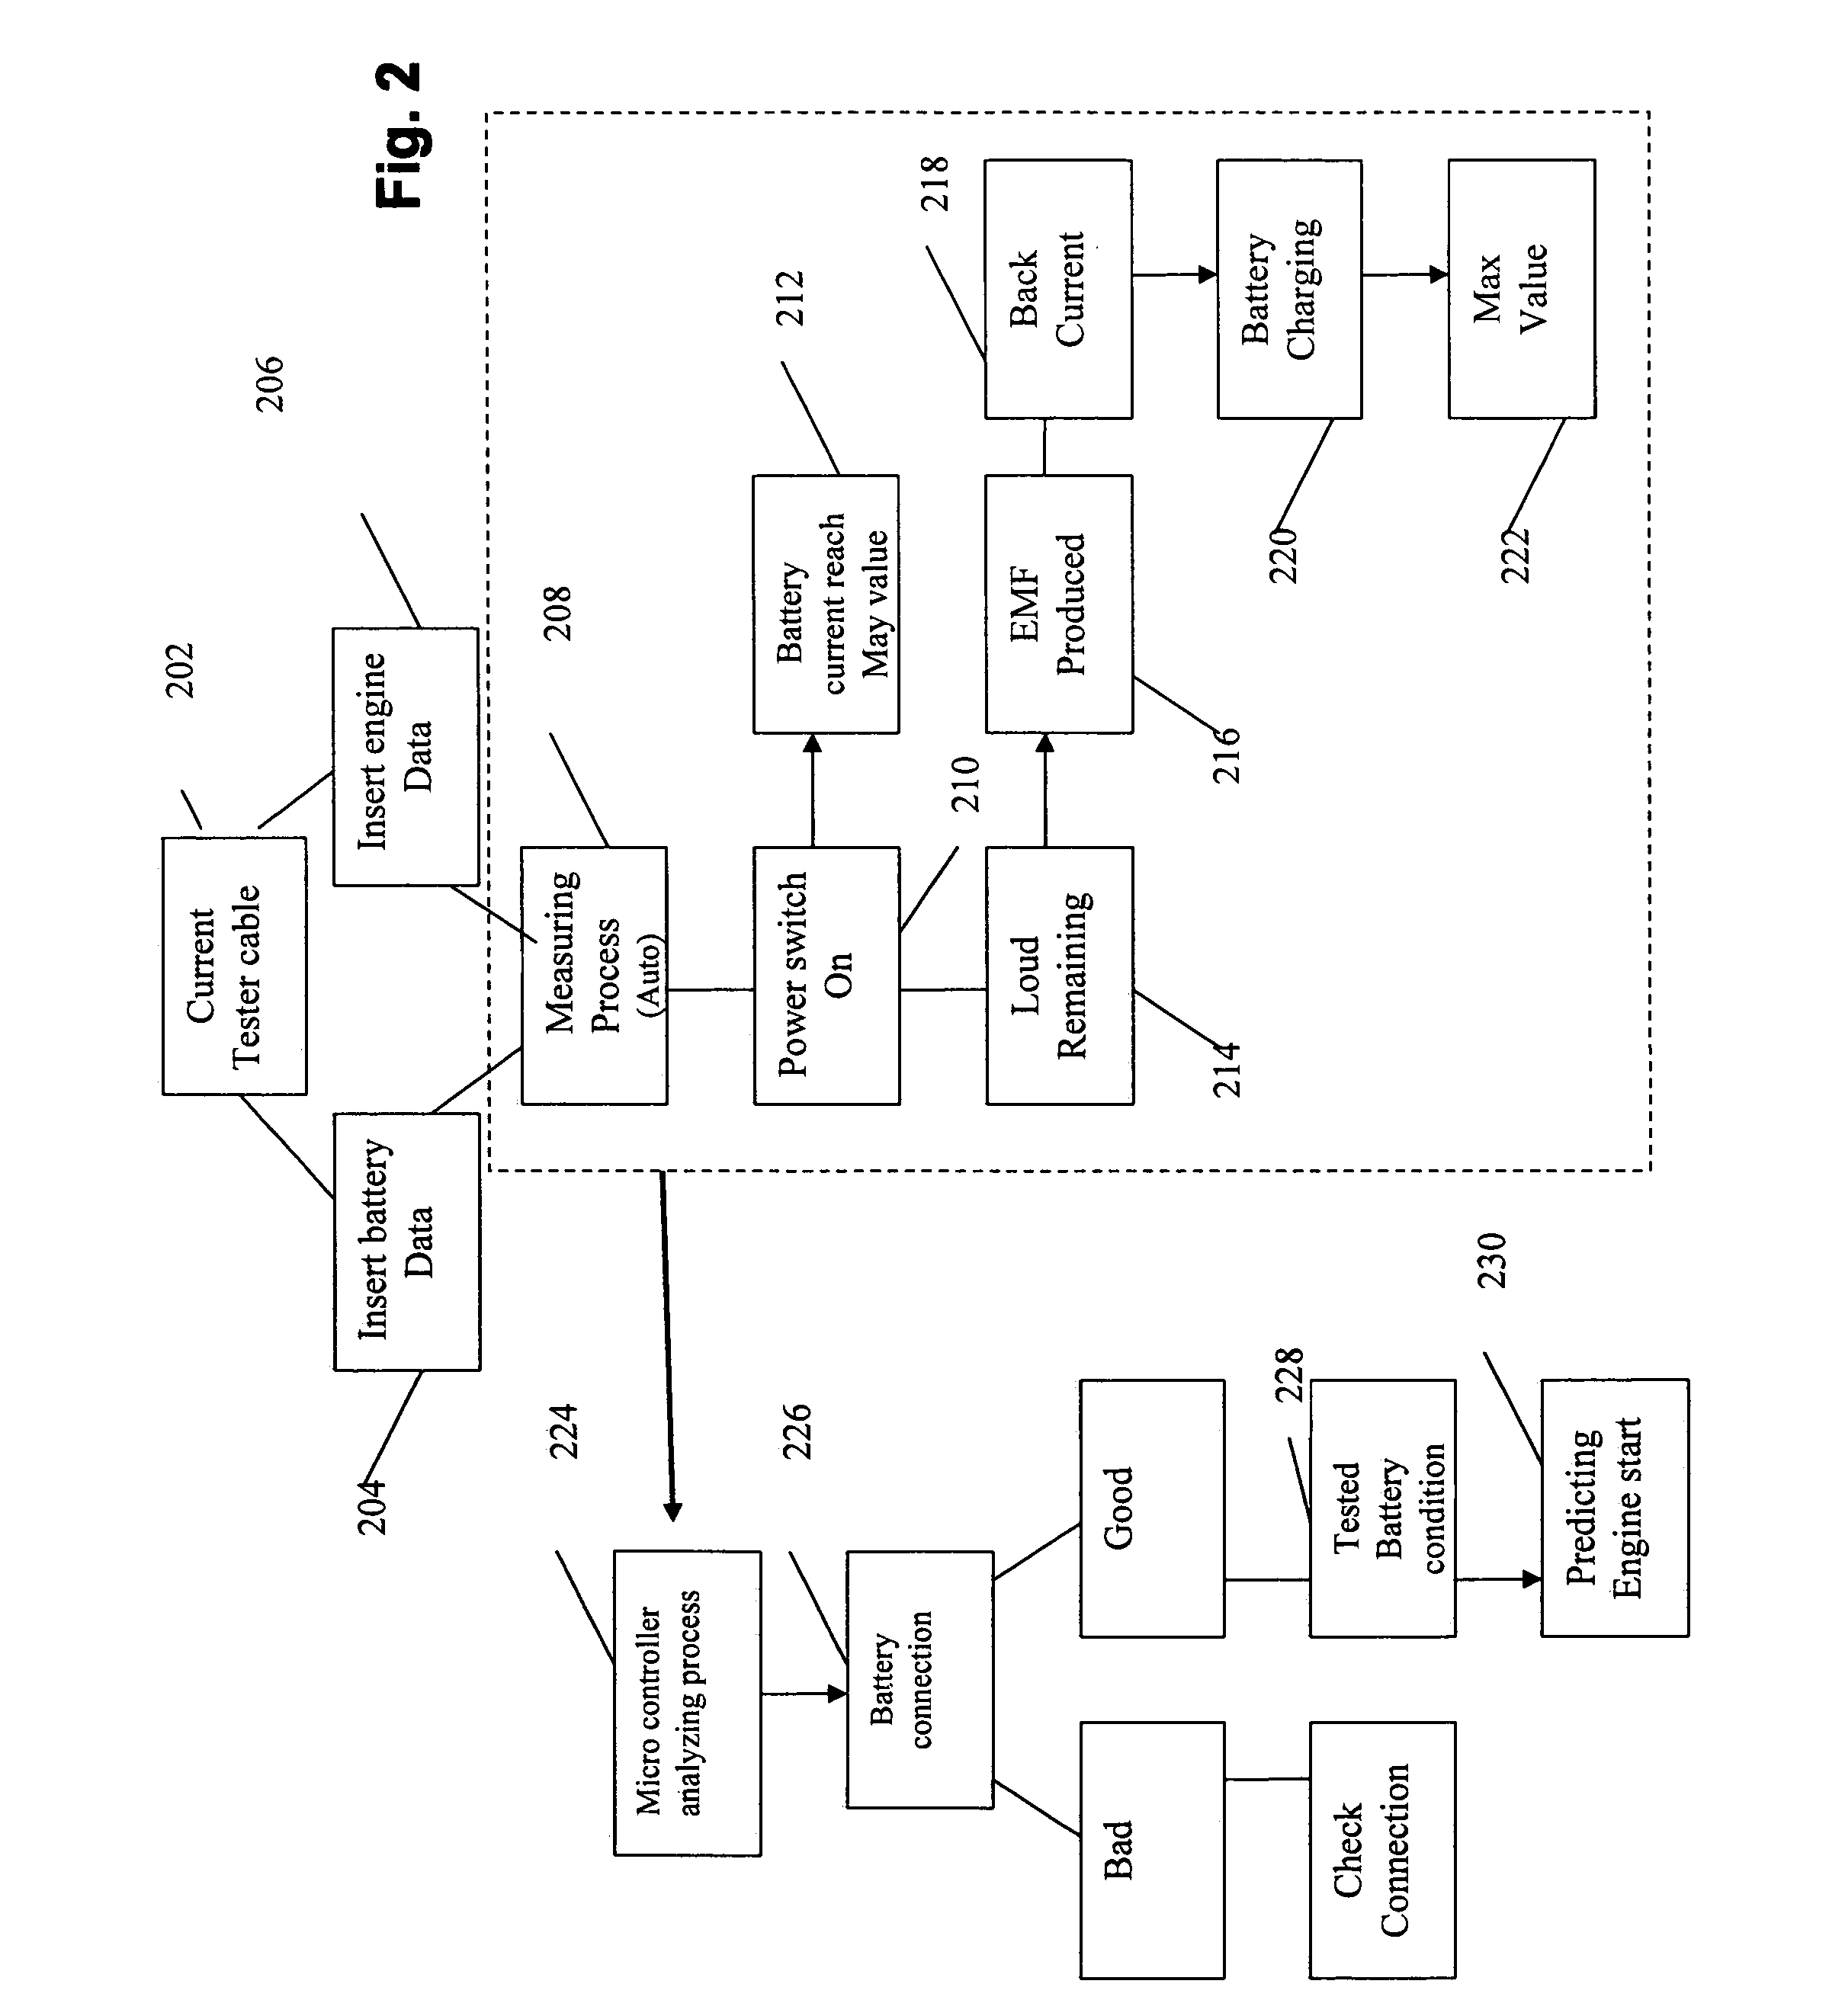 Method for testing battery condition